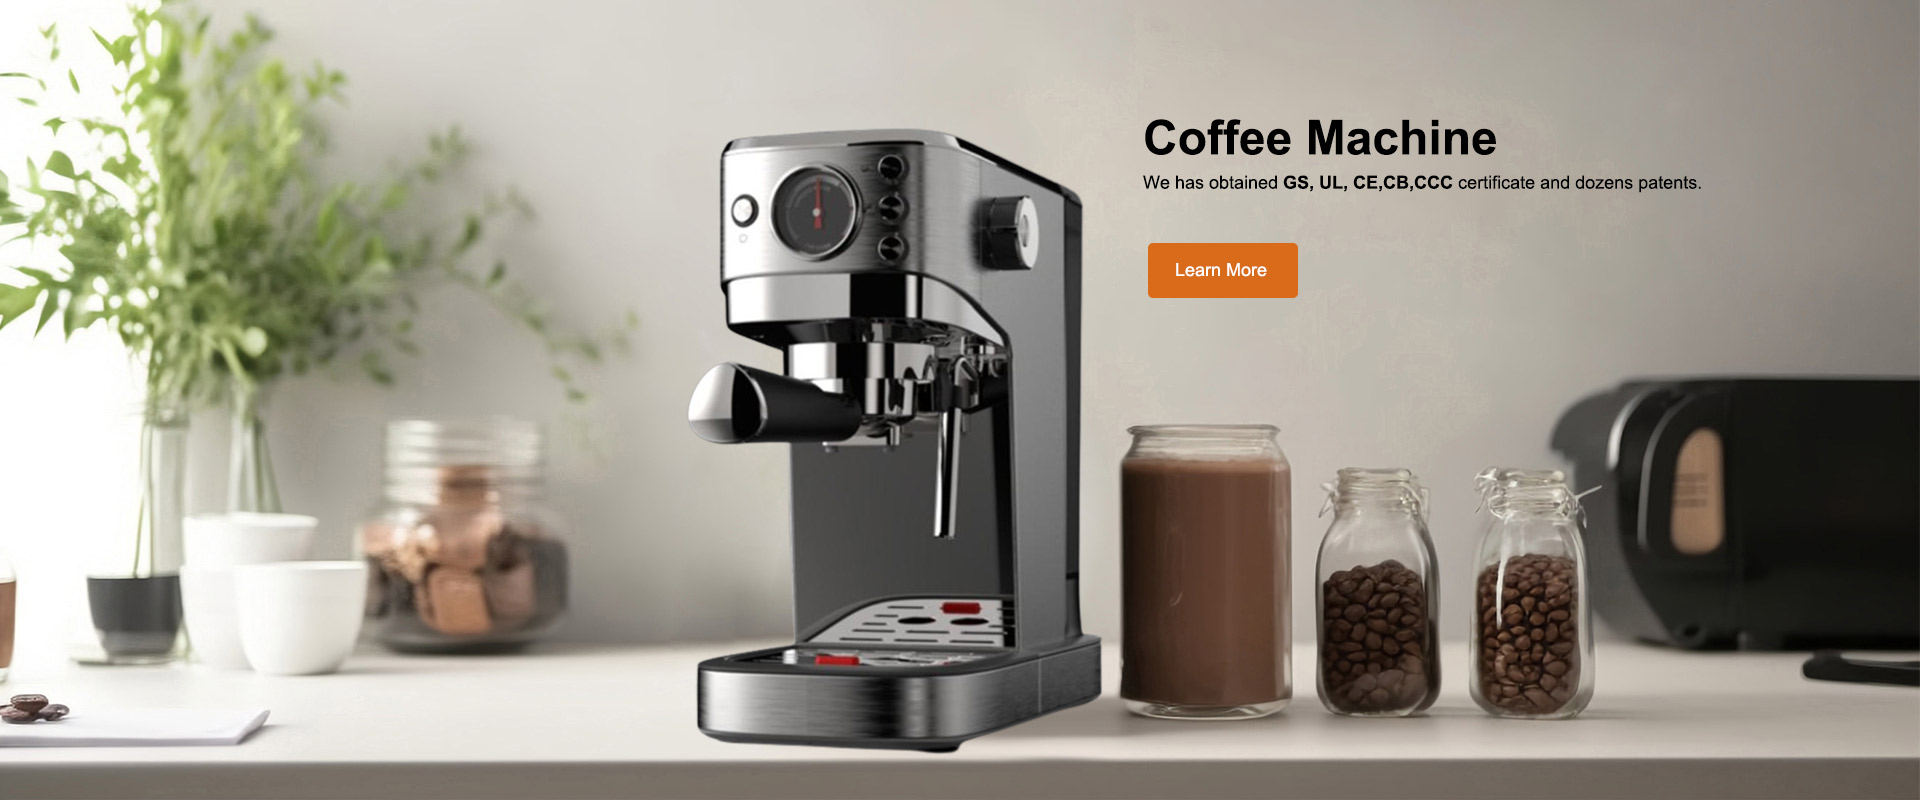 Coffee Machine We has obtained GS, UL, CE,CB,CCC certificate an